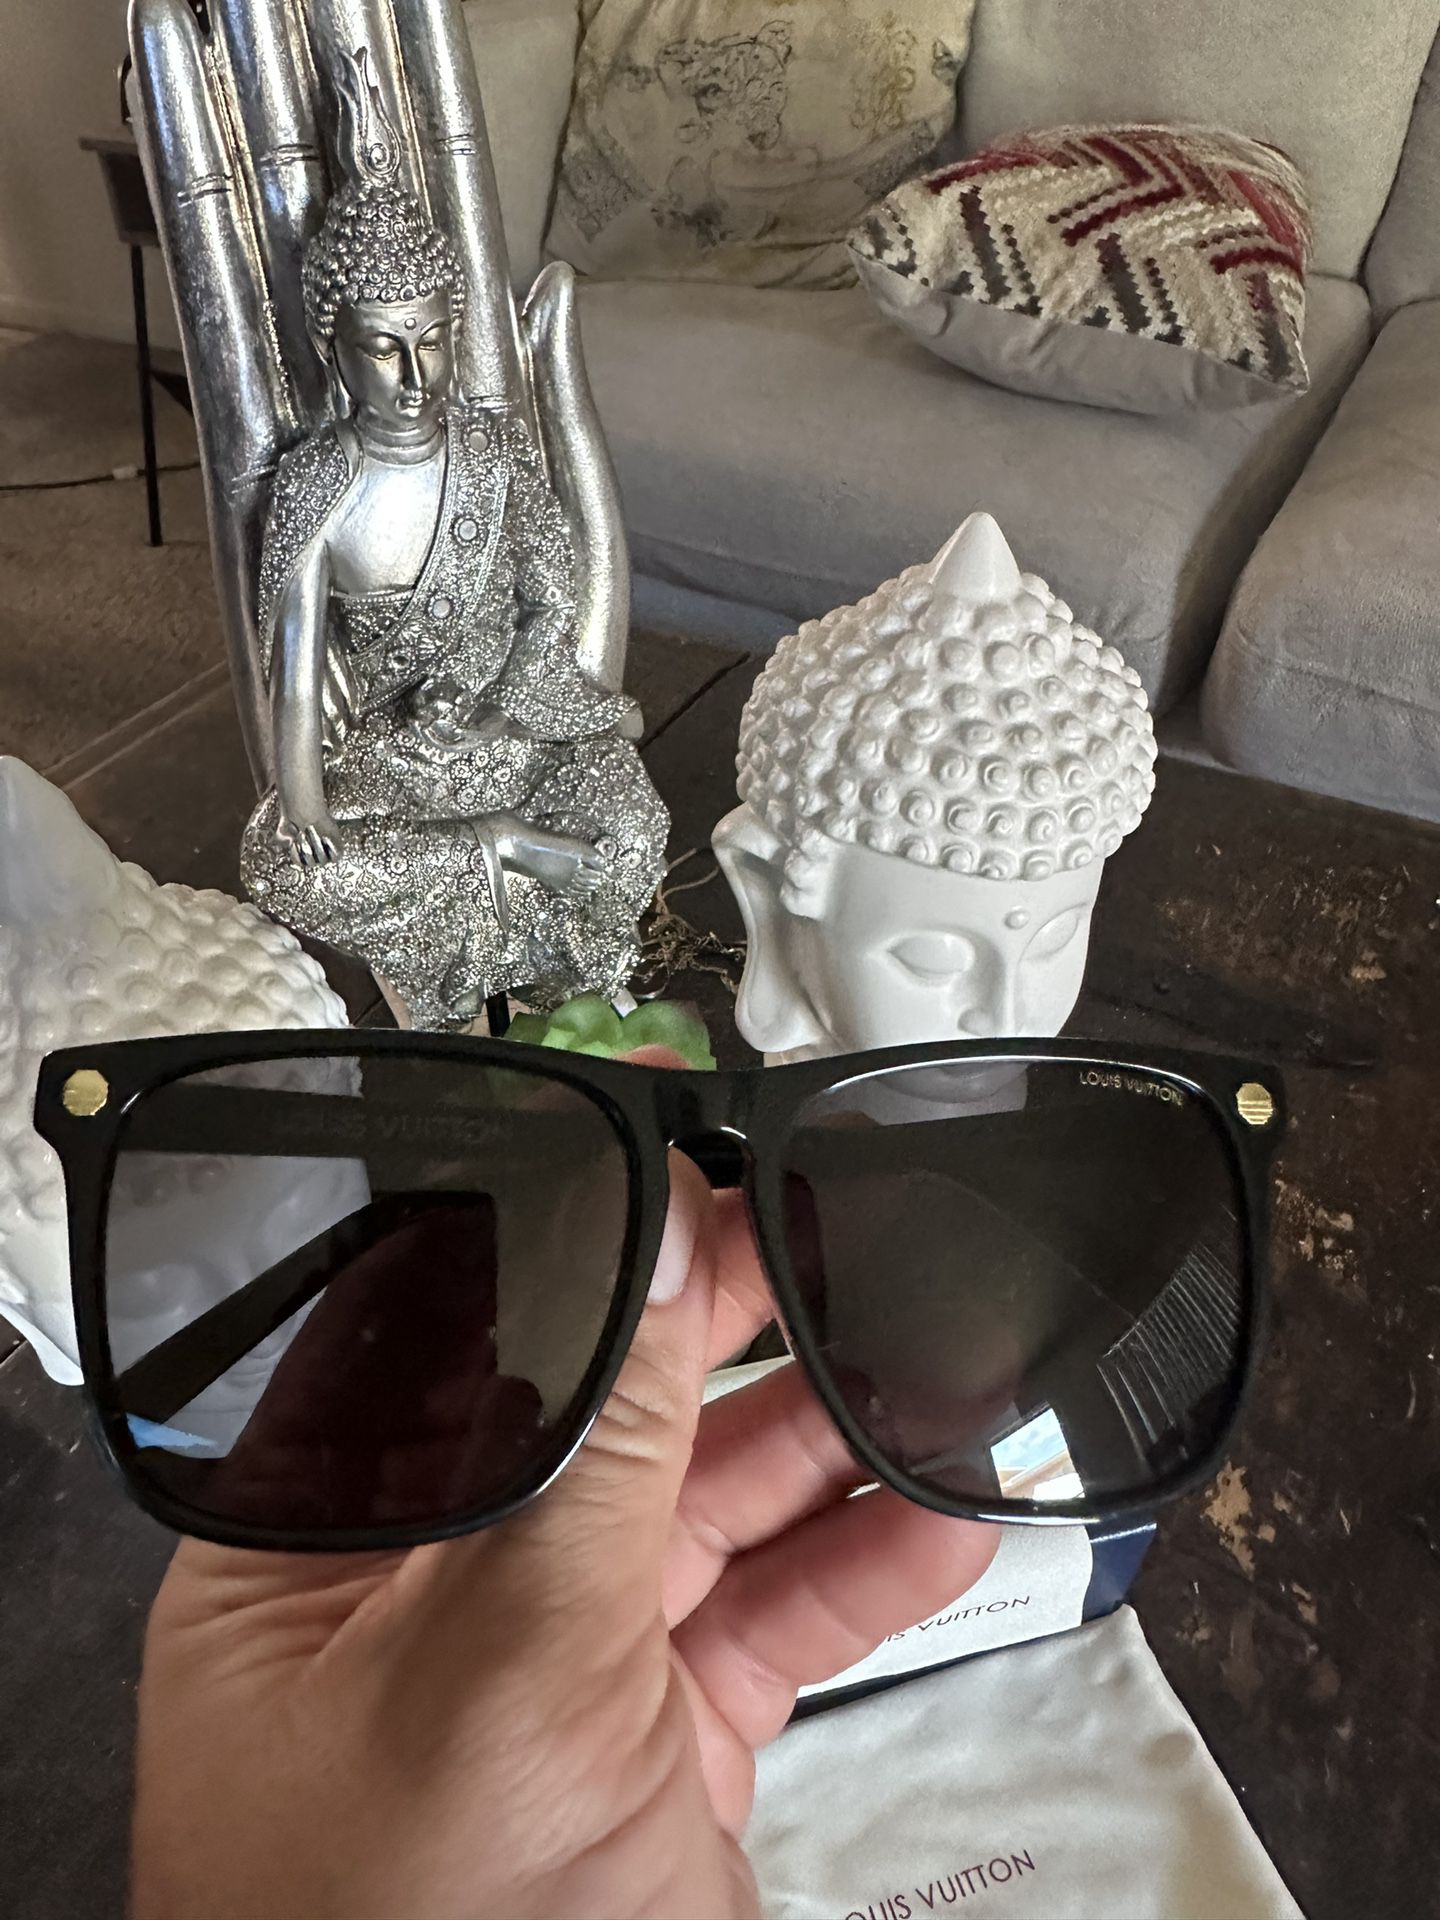 Louis Vuitton Original Glasses for Sale in San Diego, CA - OfferUp